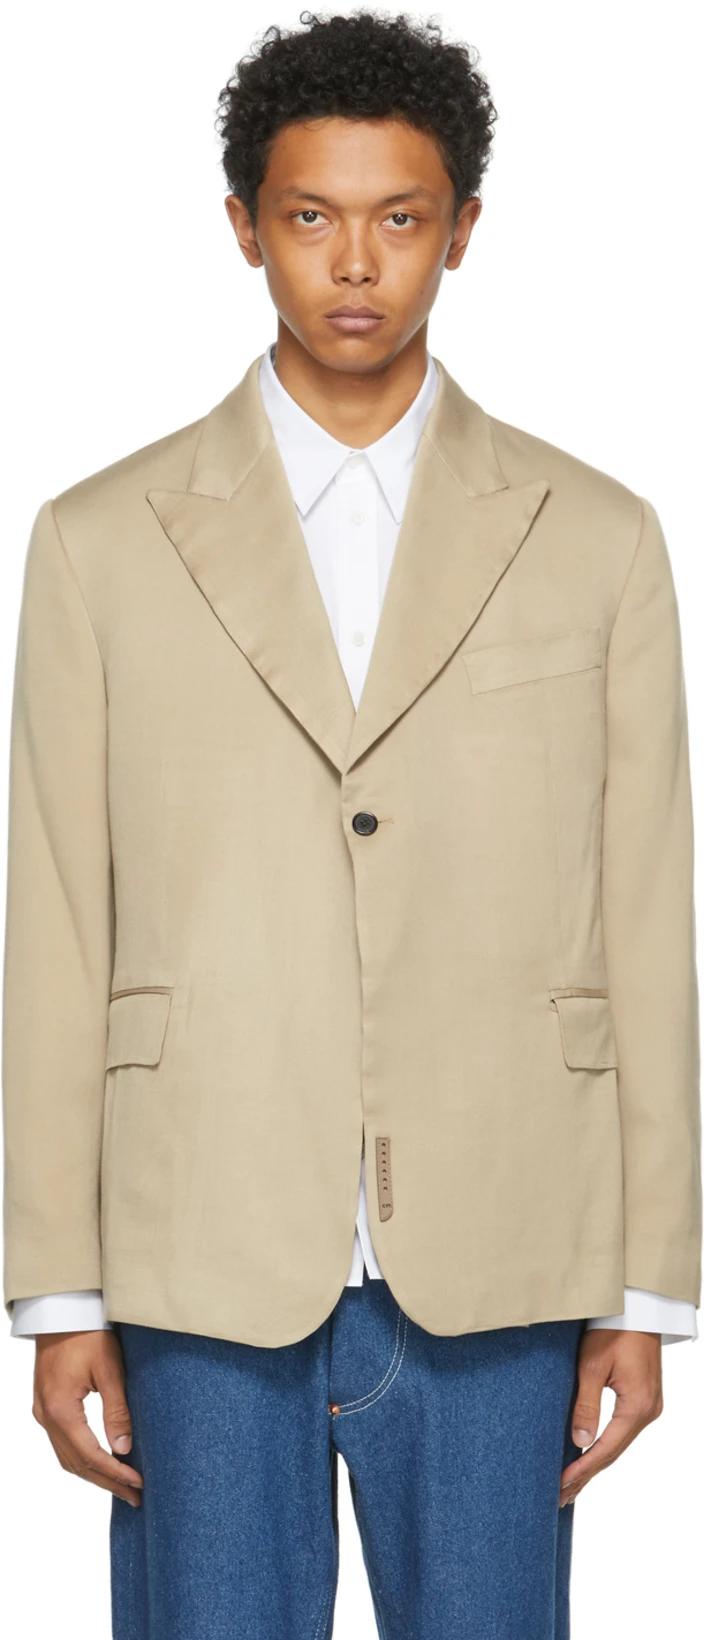 Khaki Double Breasted Blazer by CONNOR MC KNIGHT